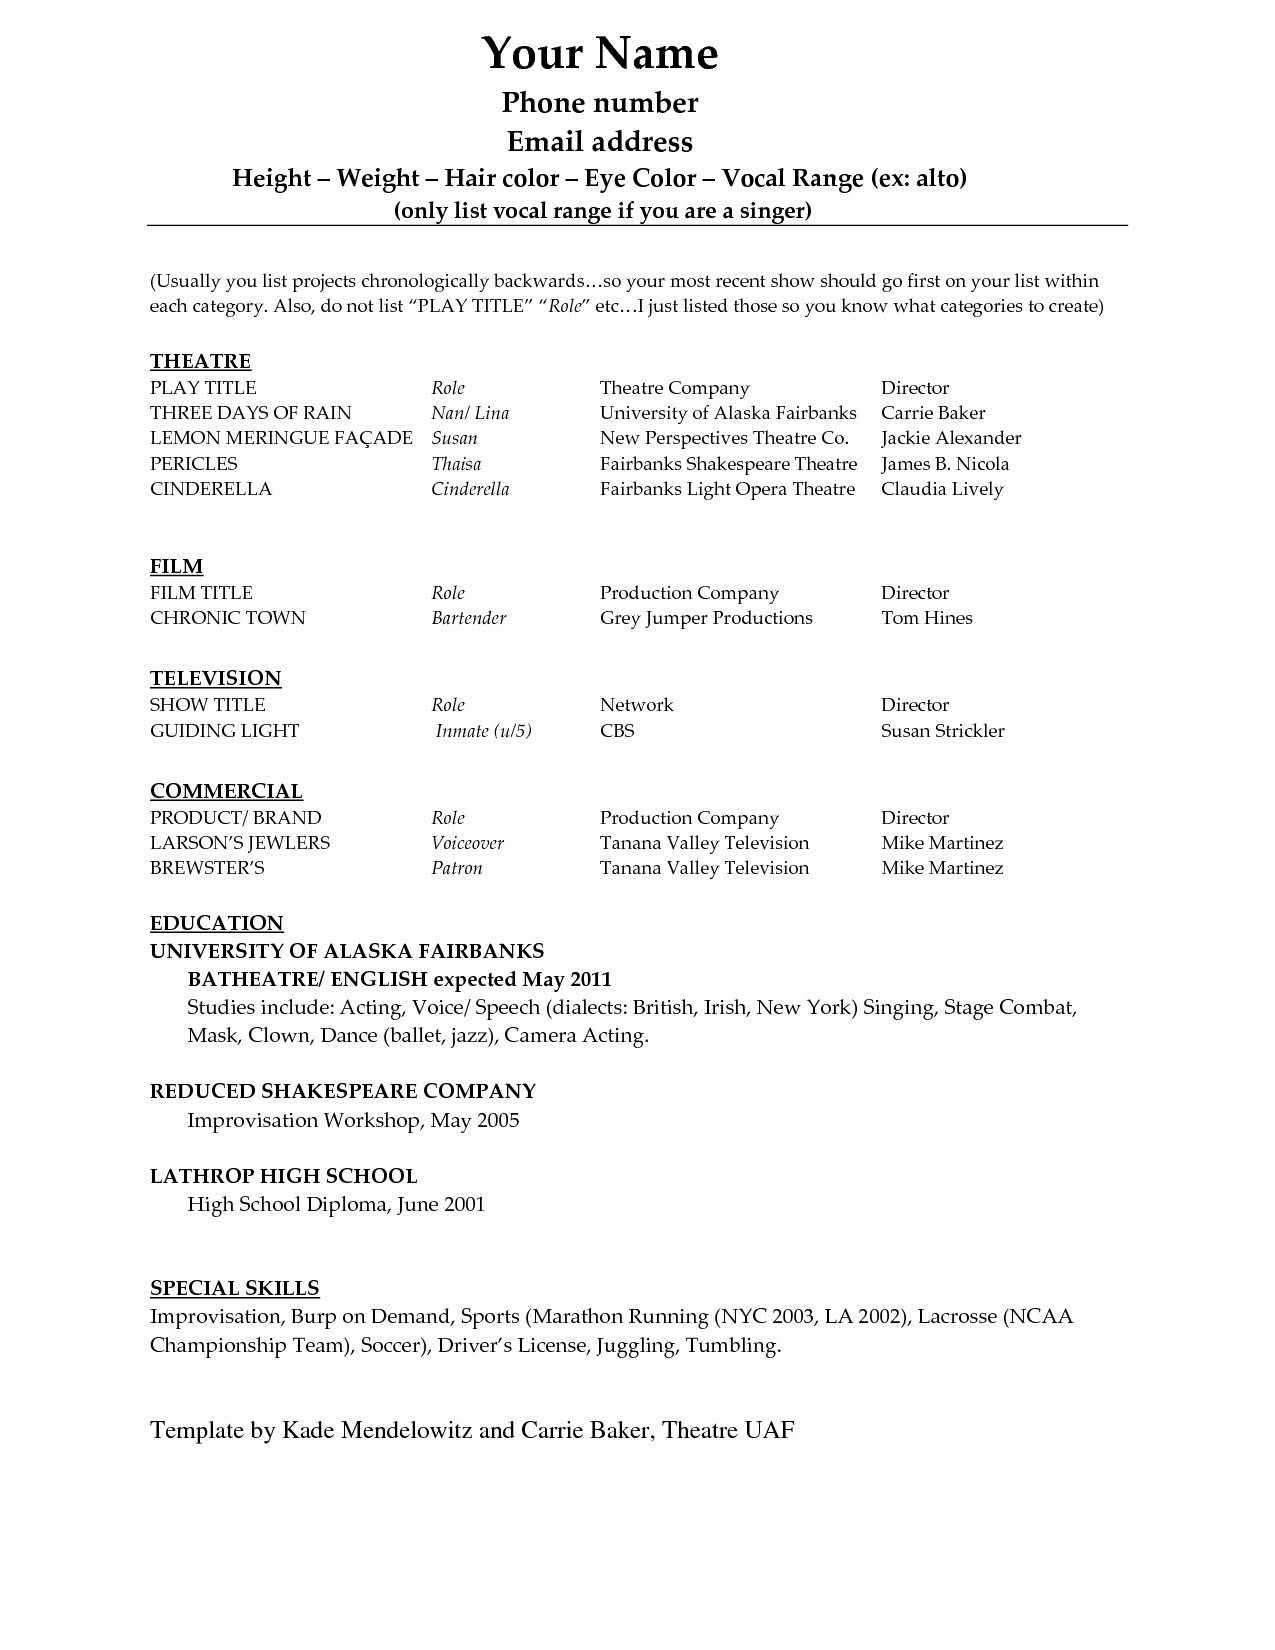 Academic Cv Template Word New Academic Cv Templates Word Find Word Templates